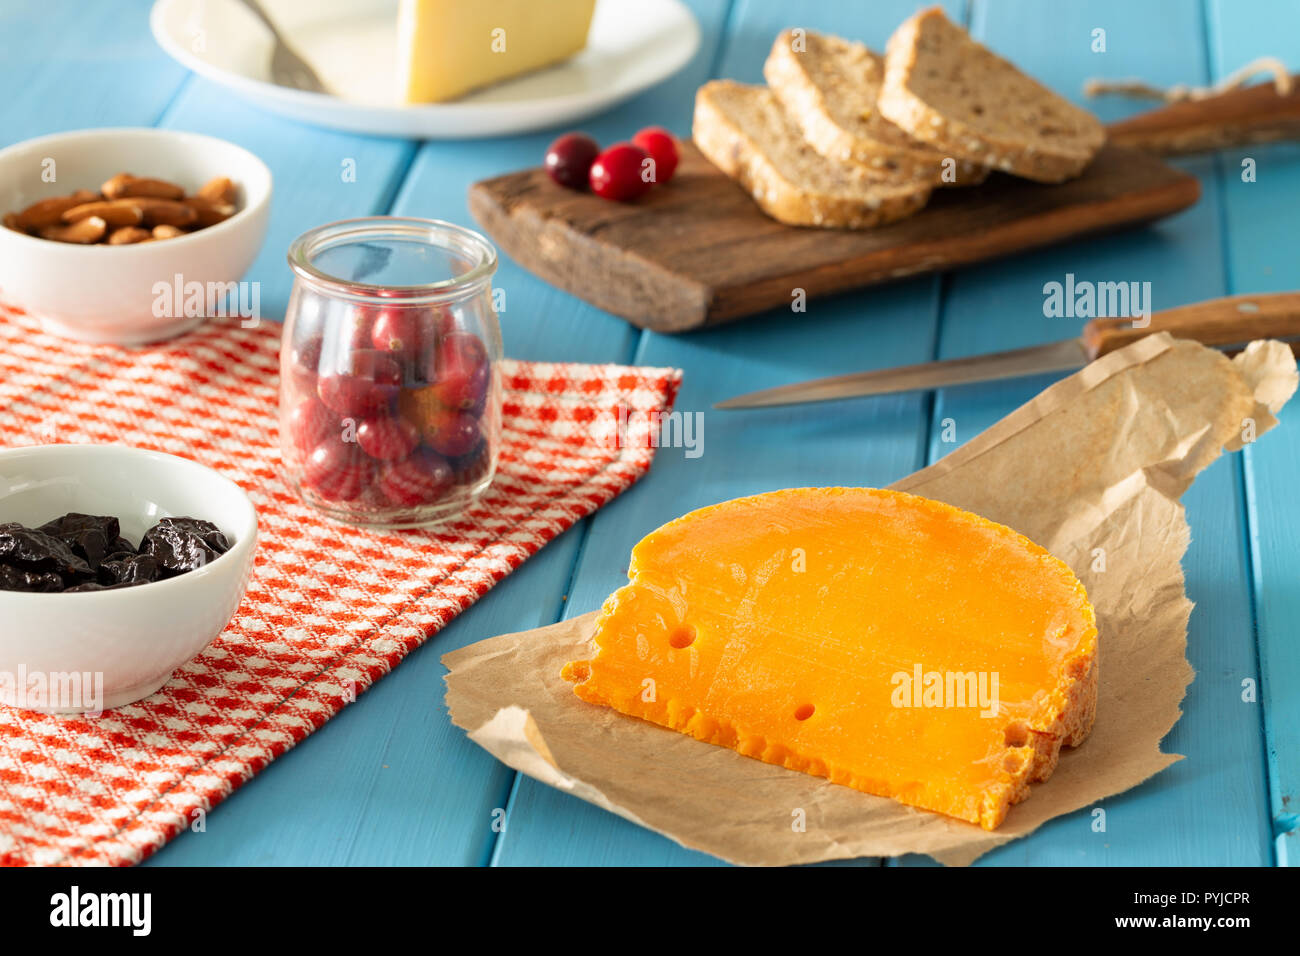 Mimolette,  type of cheese together with the addition of bread and fresh cranberries Stock Photo